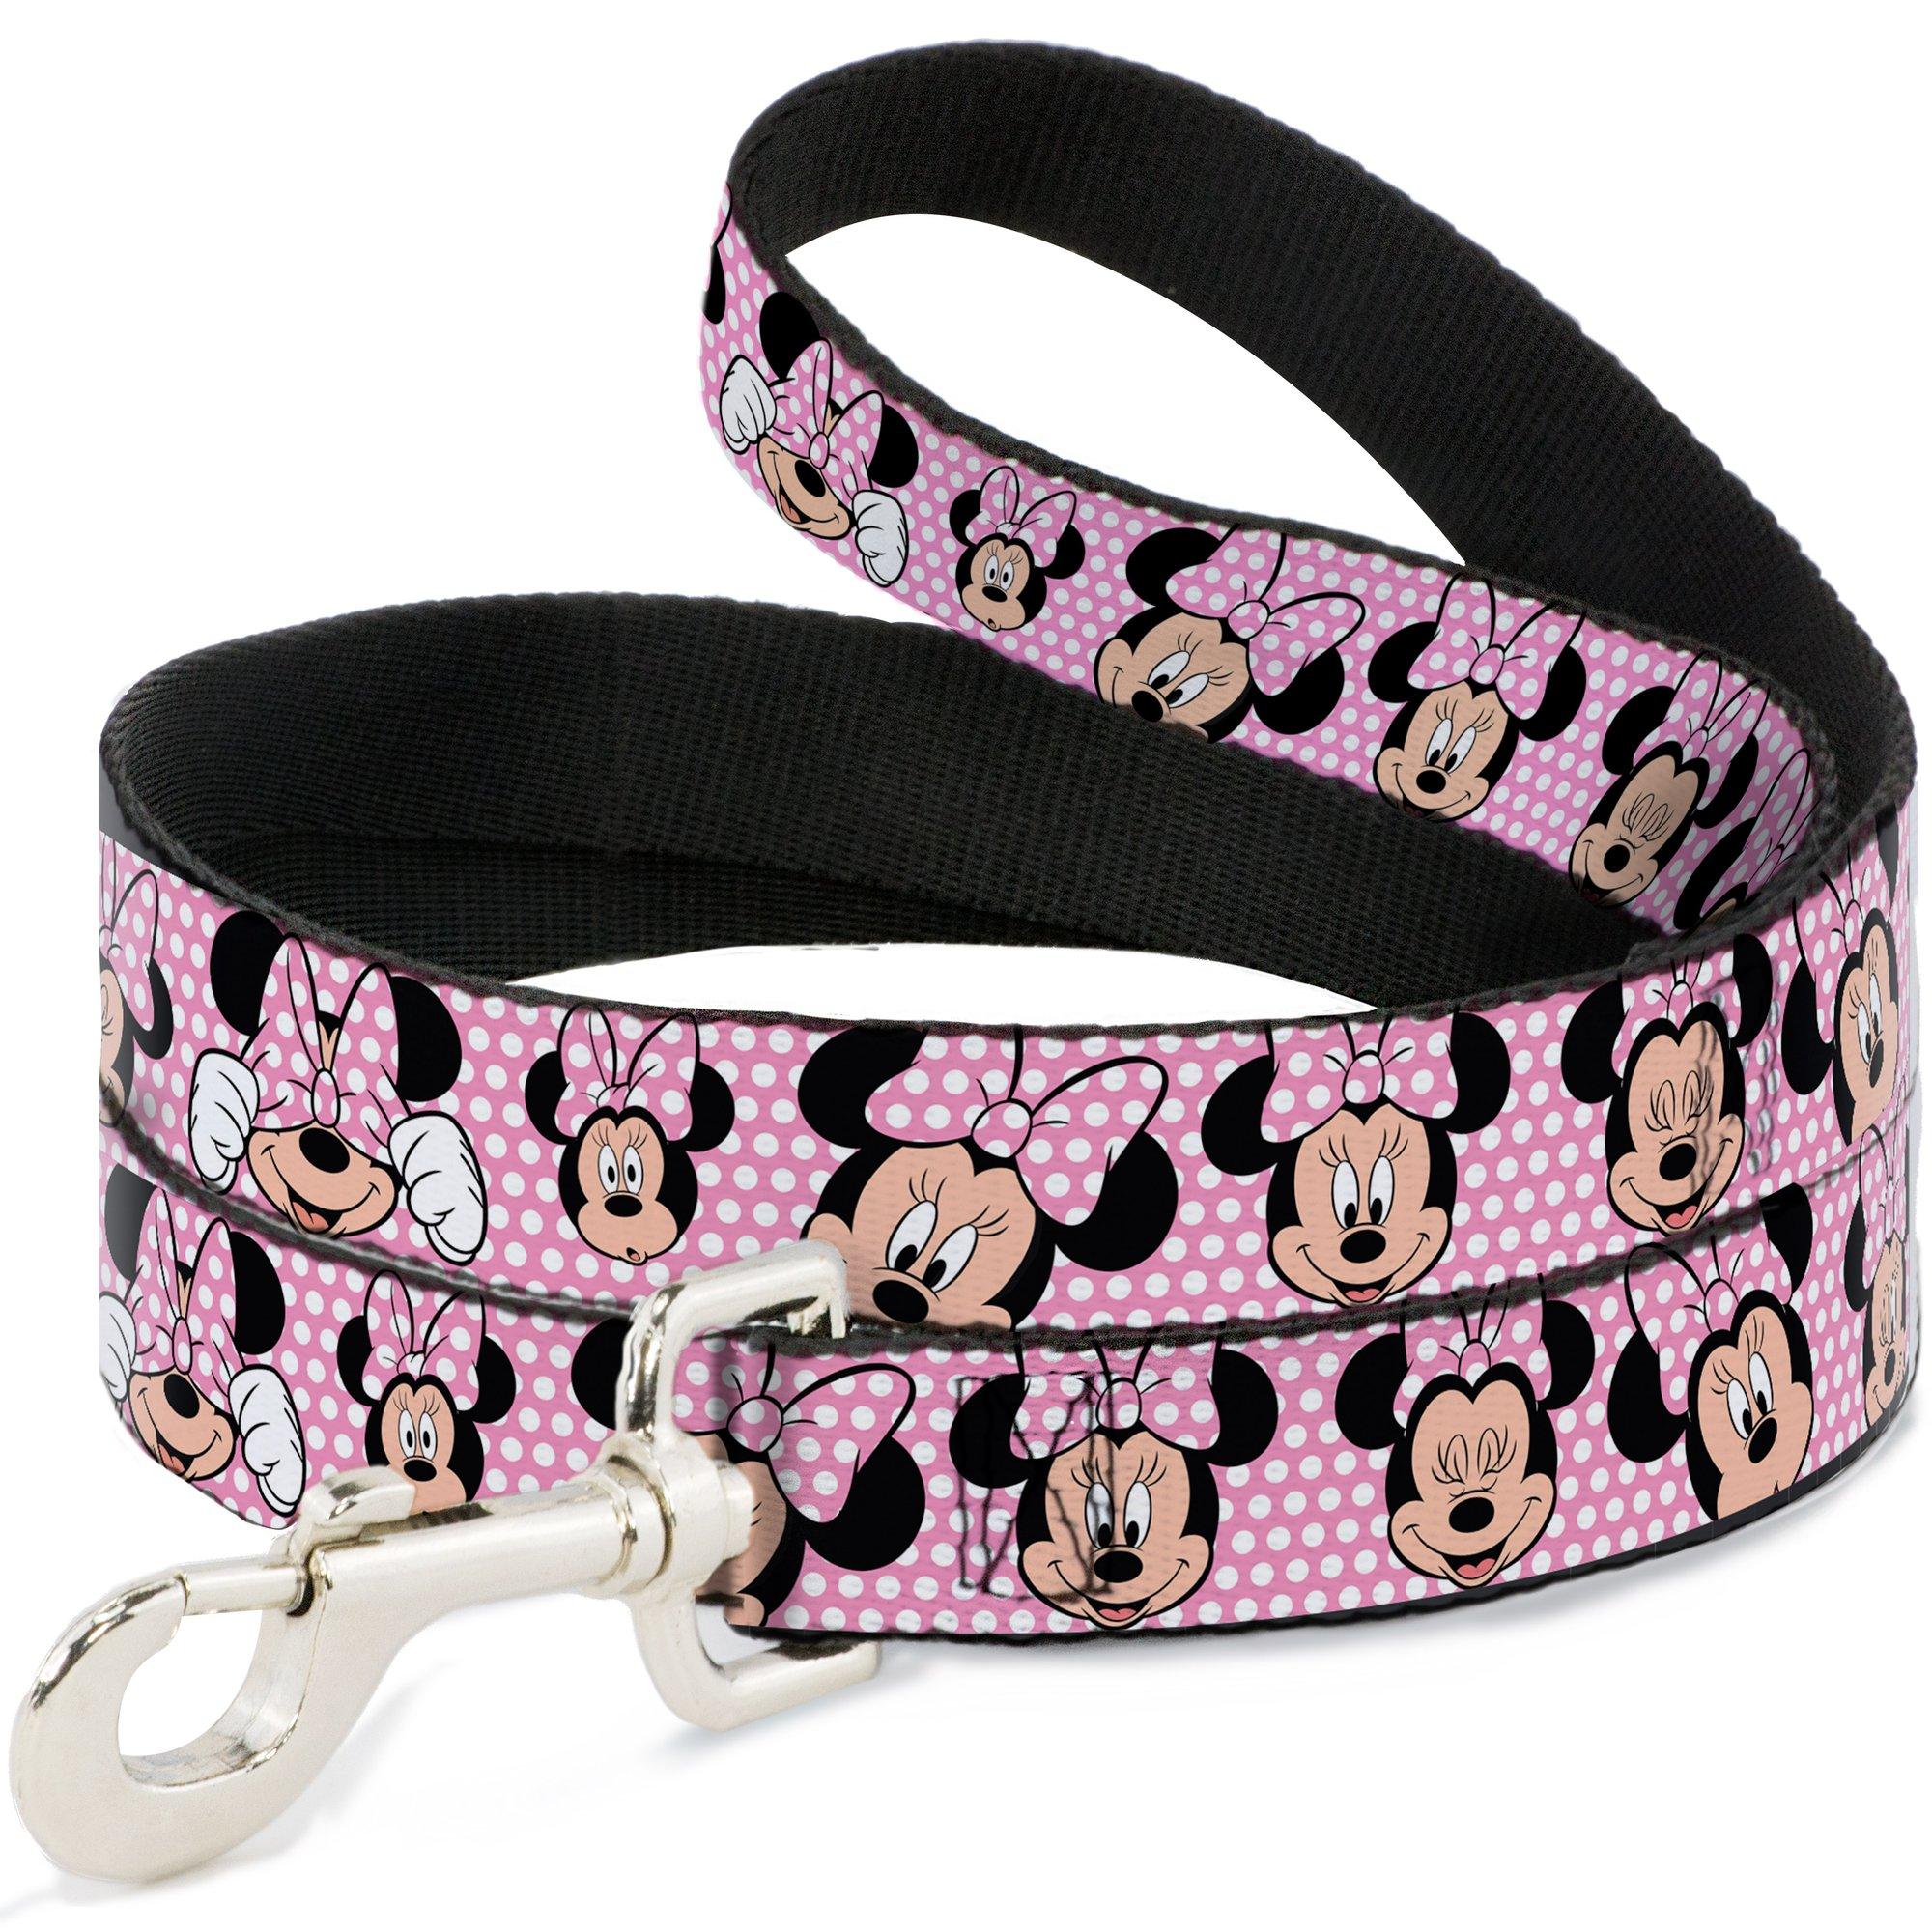 Minnie Mouse Face Dog Leash by Buckle-Down - Pink